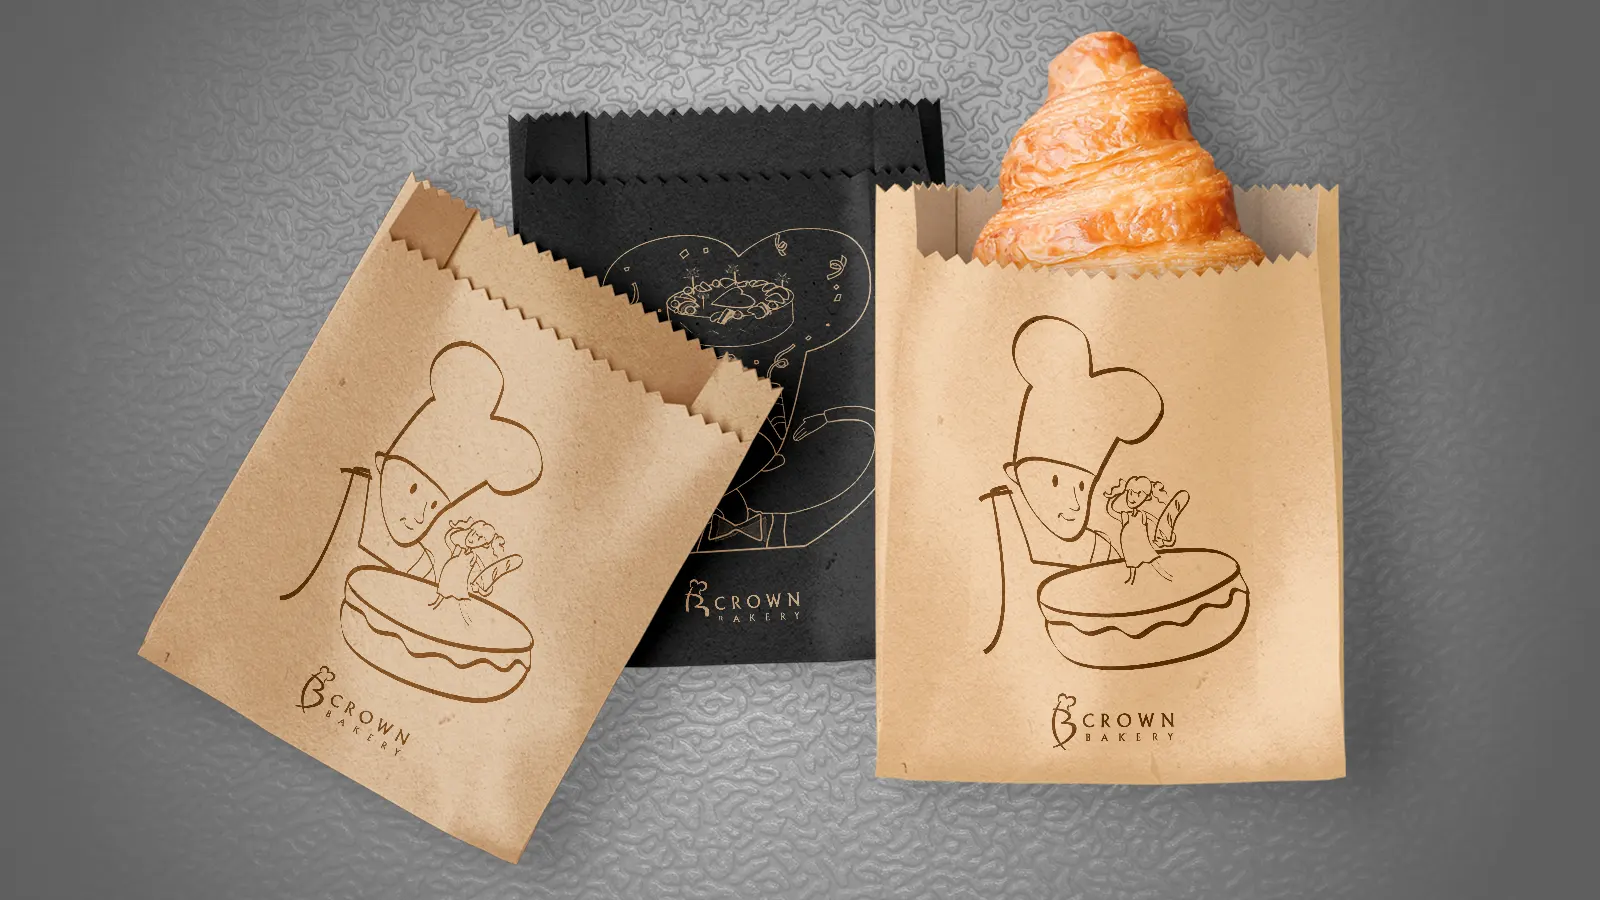 Crown Bakery Package Design Agency - ADDVALUN